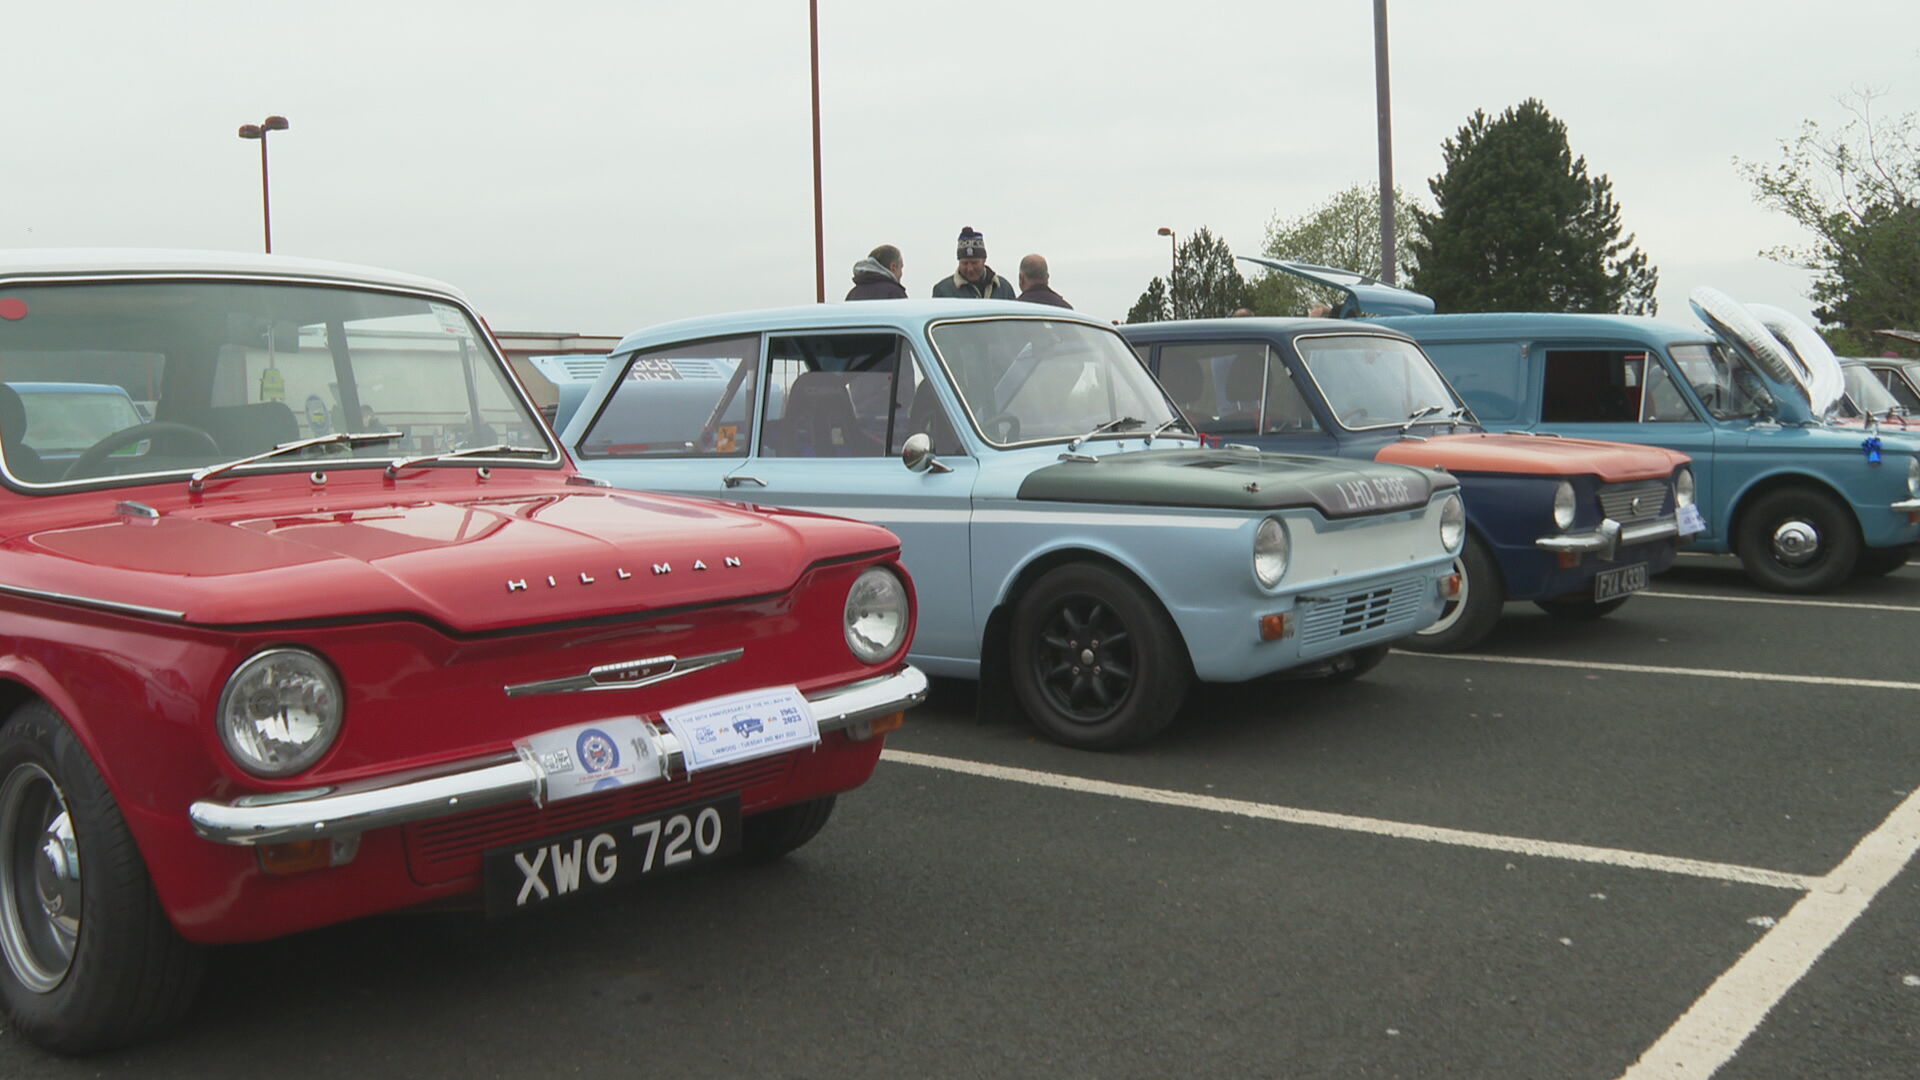 Hillman Imps were put on display in Linwood